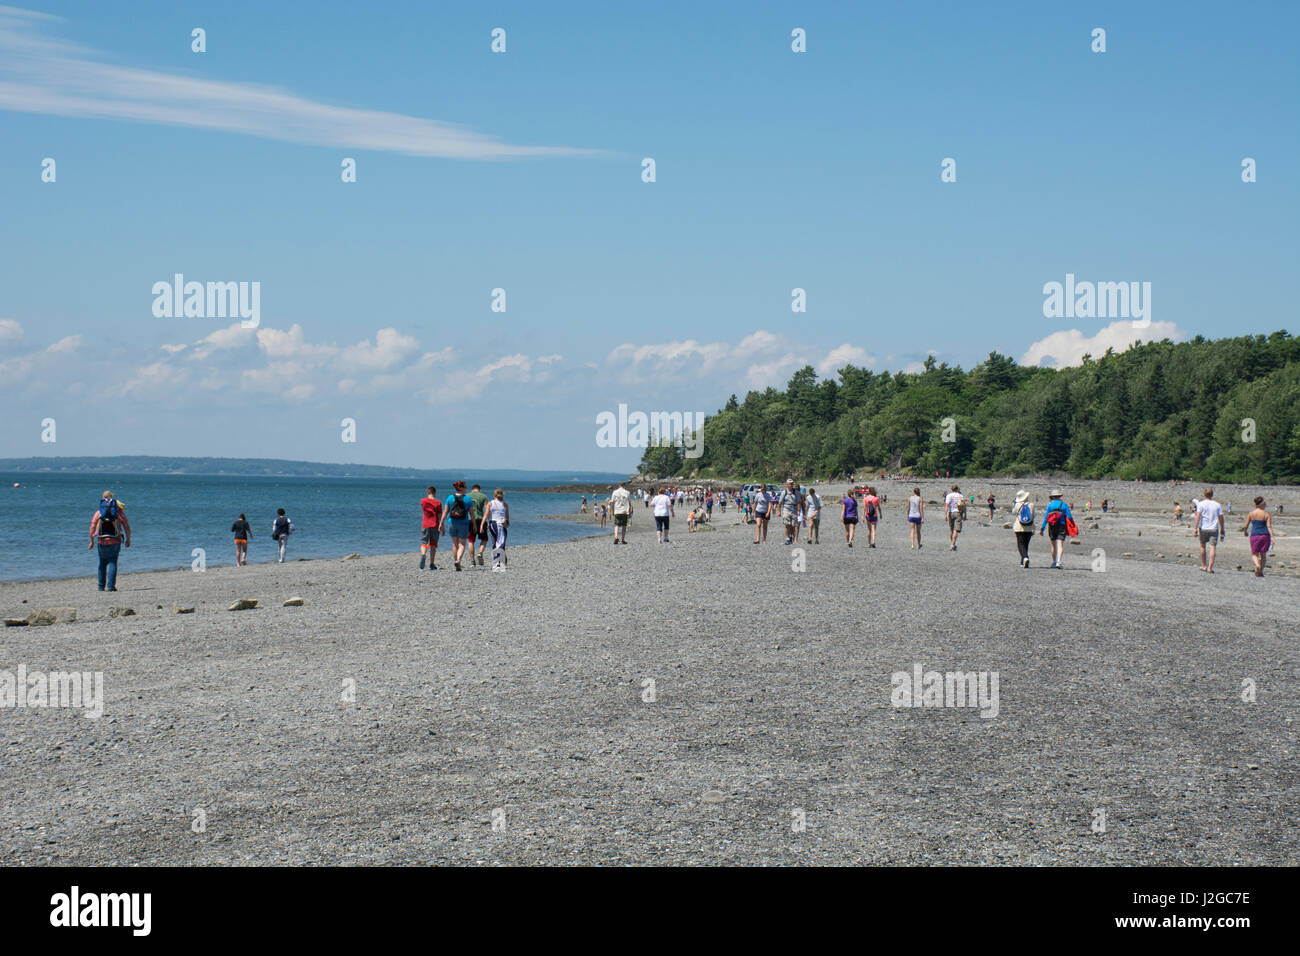 Maine, Bar Harbor. Bar Island, accessed only at low tide by a natural land bridge that emerges from the ocean. Tourists crossing over the Land Bridge at low tide. Stock Photo